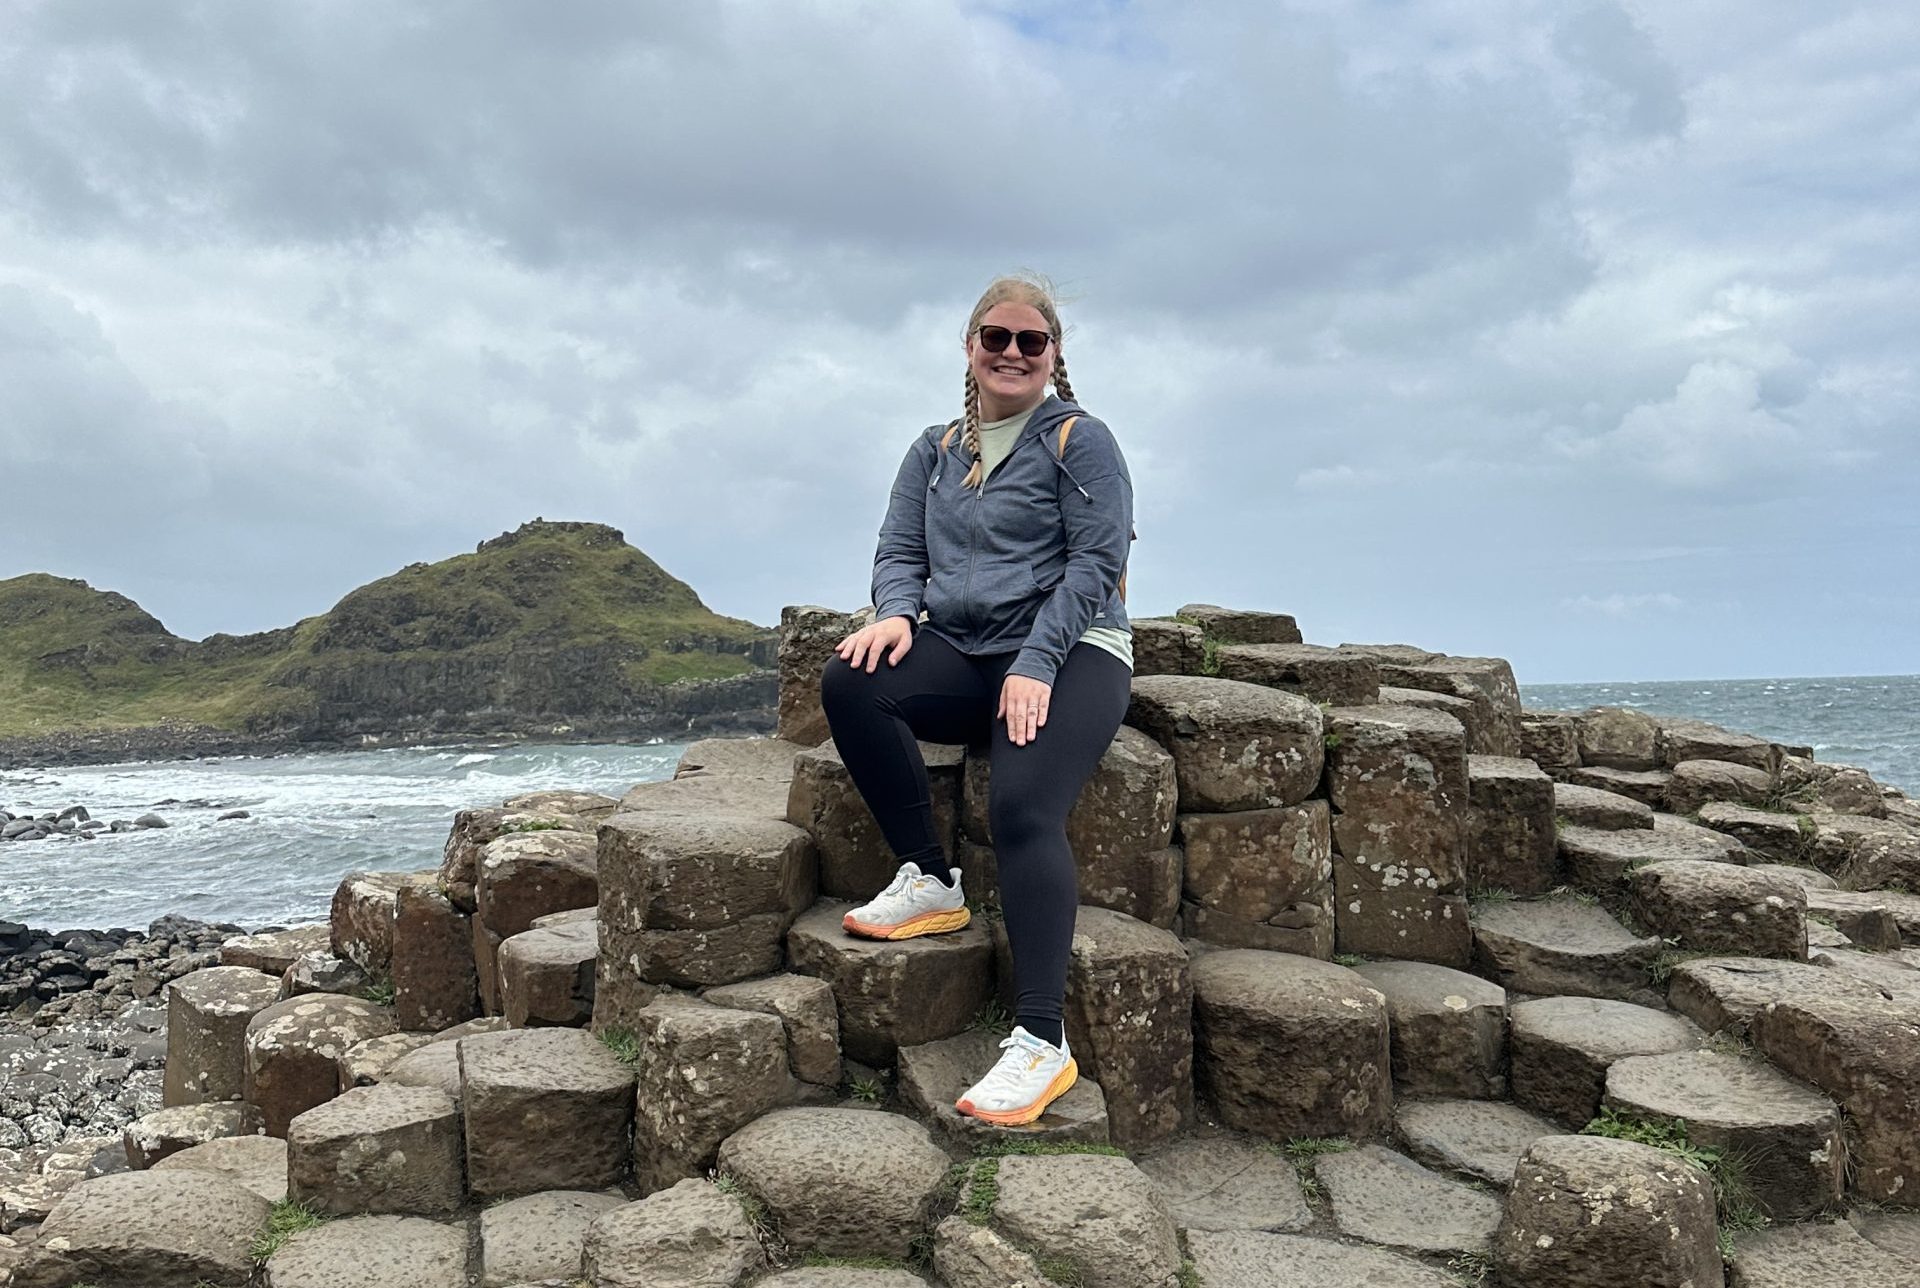 UA Little Rock student Emily DeAtley visits the Giant's Causeway north of Belfast while working abroad in Ireland this summer.